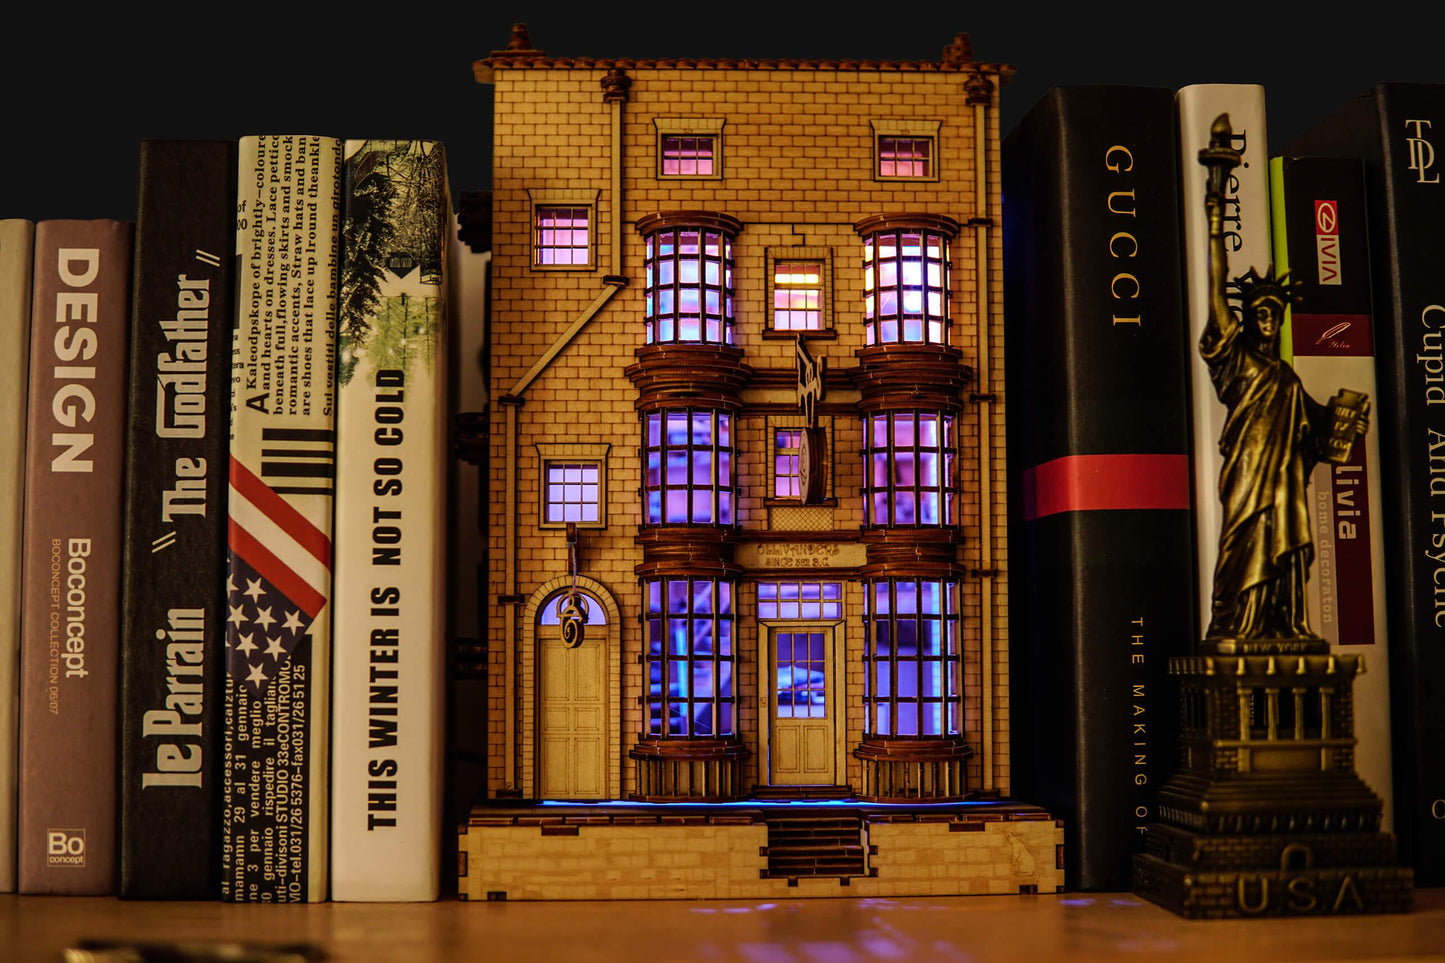 Ollivanders Wand Shop Book Nook - DIY Book Nook Kits - Wizard Alley Book Nooks Magic Alley Book Shelf Insert Book Scenery with LED